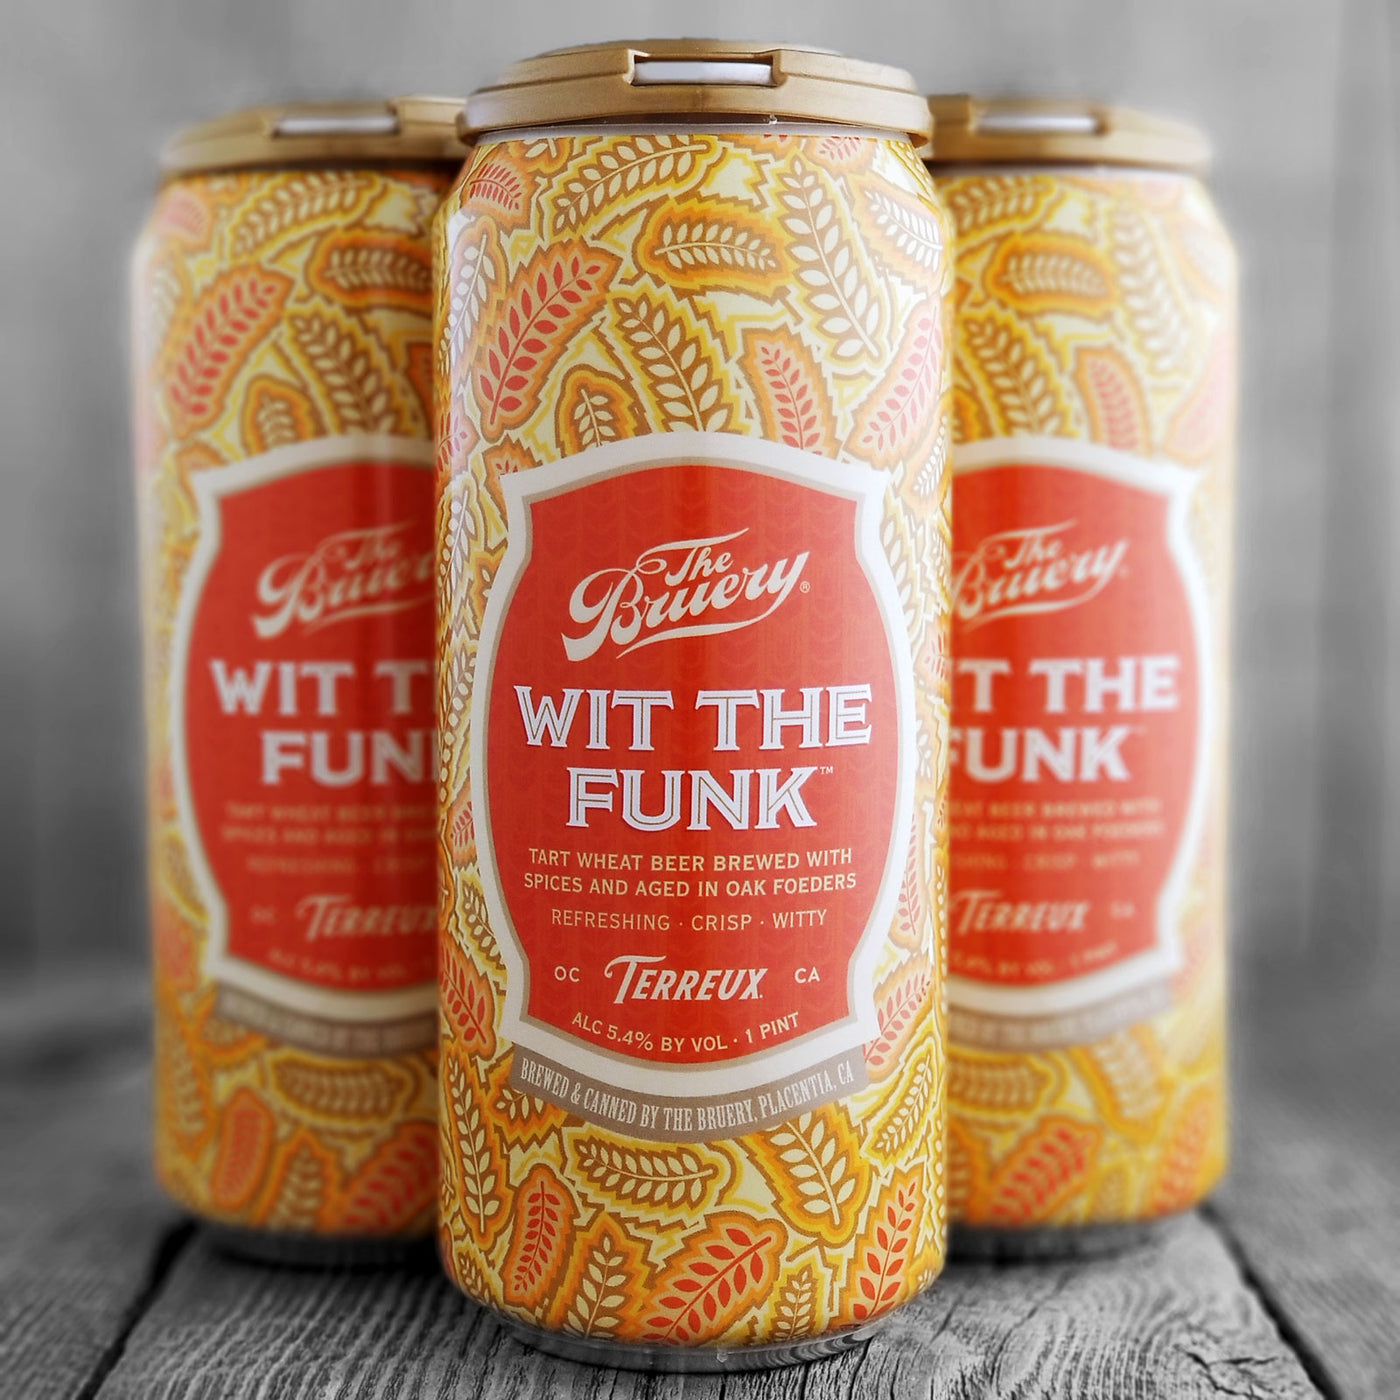 The Bruery Wit The Funk